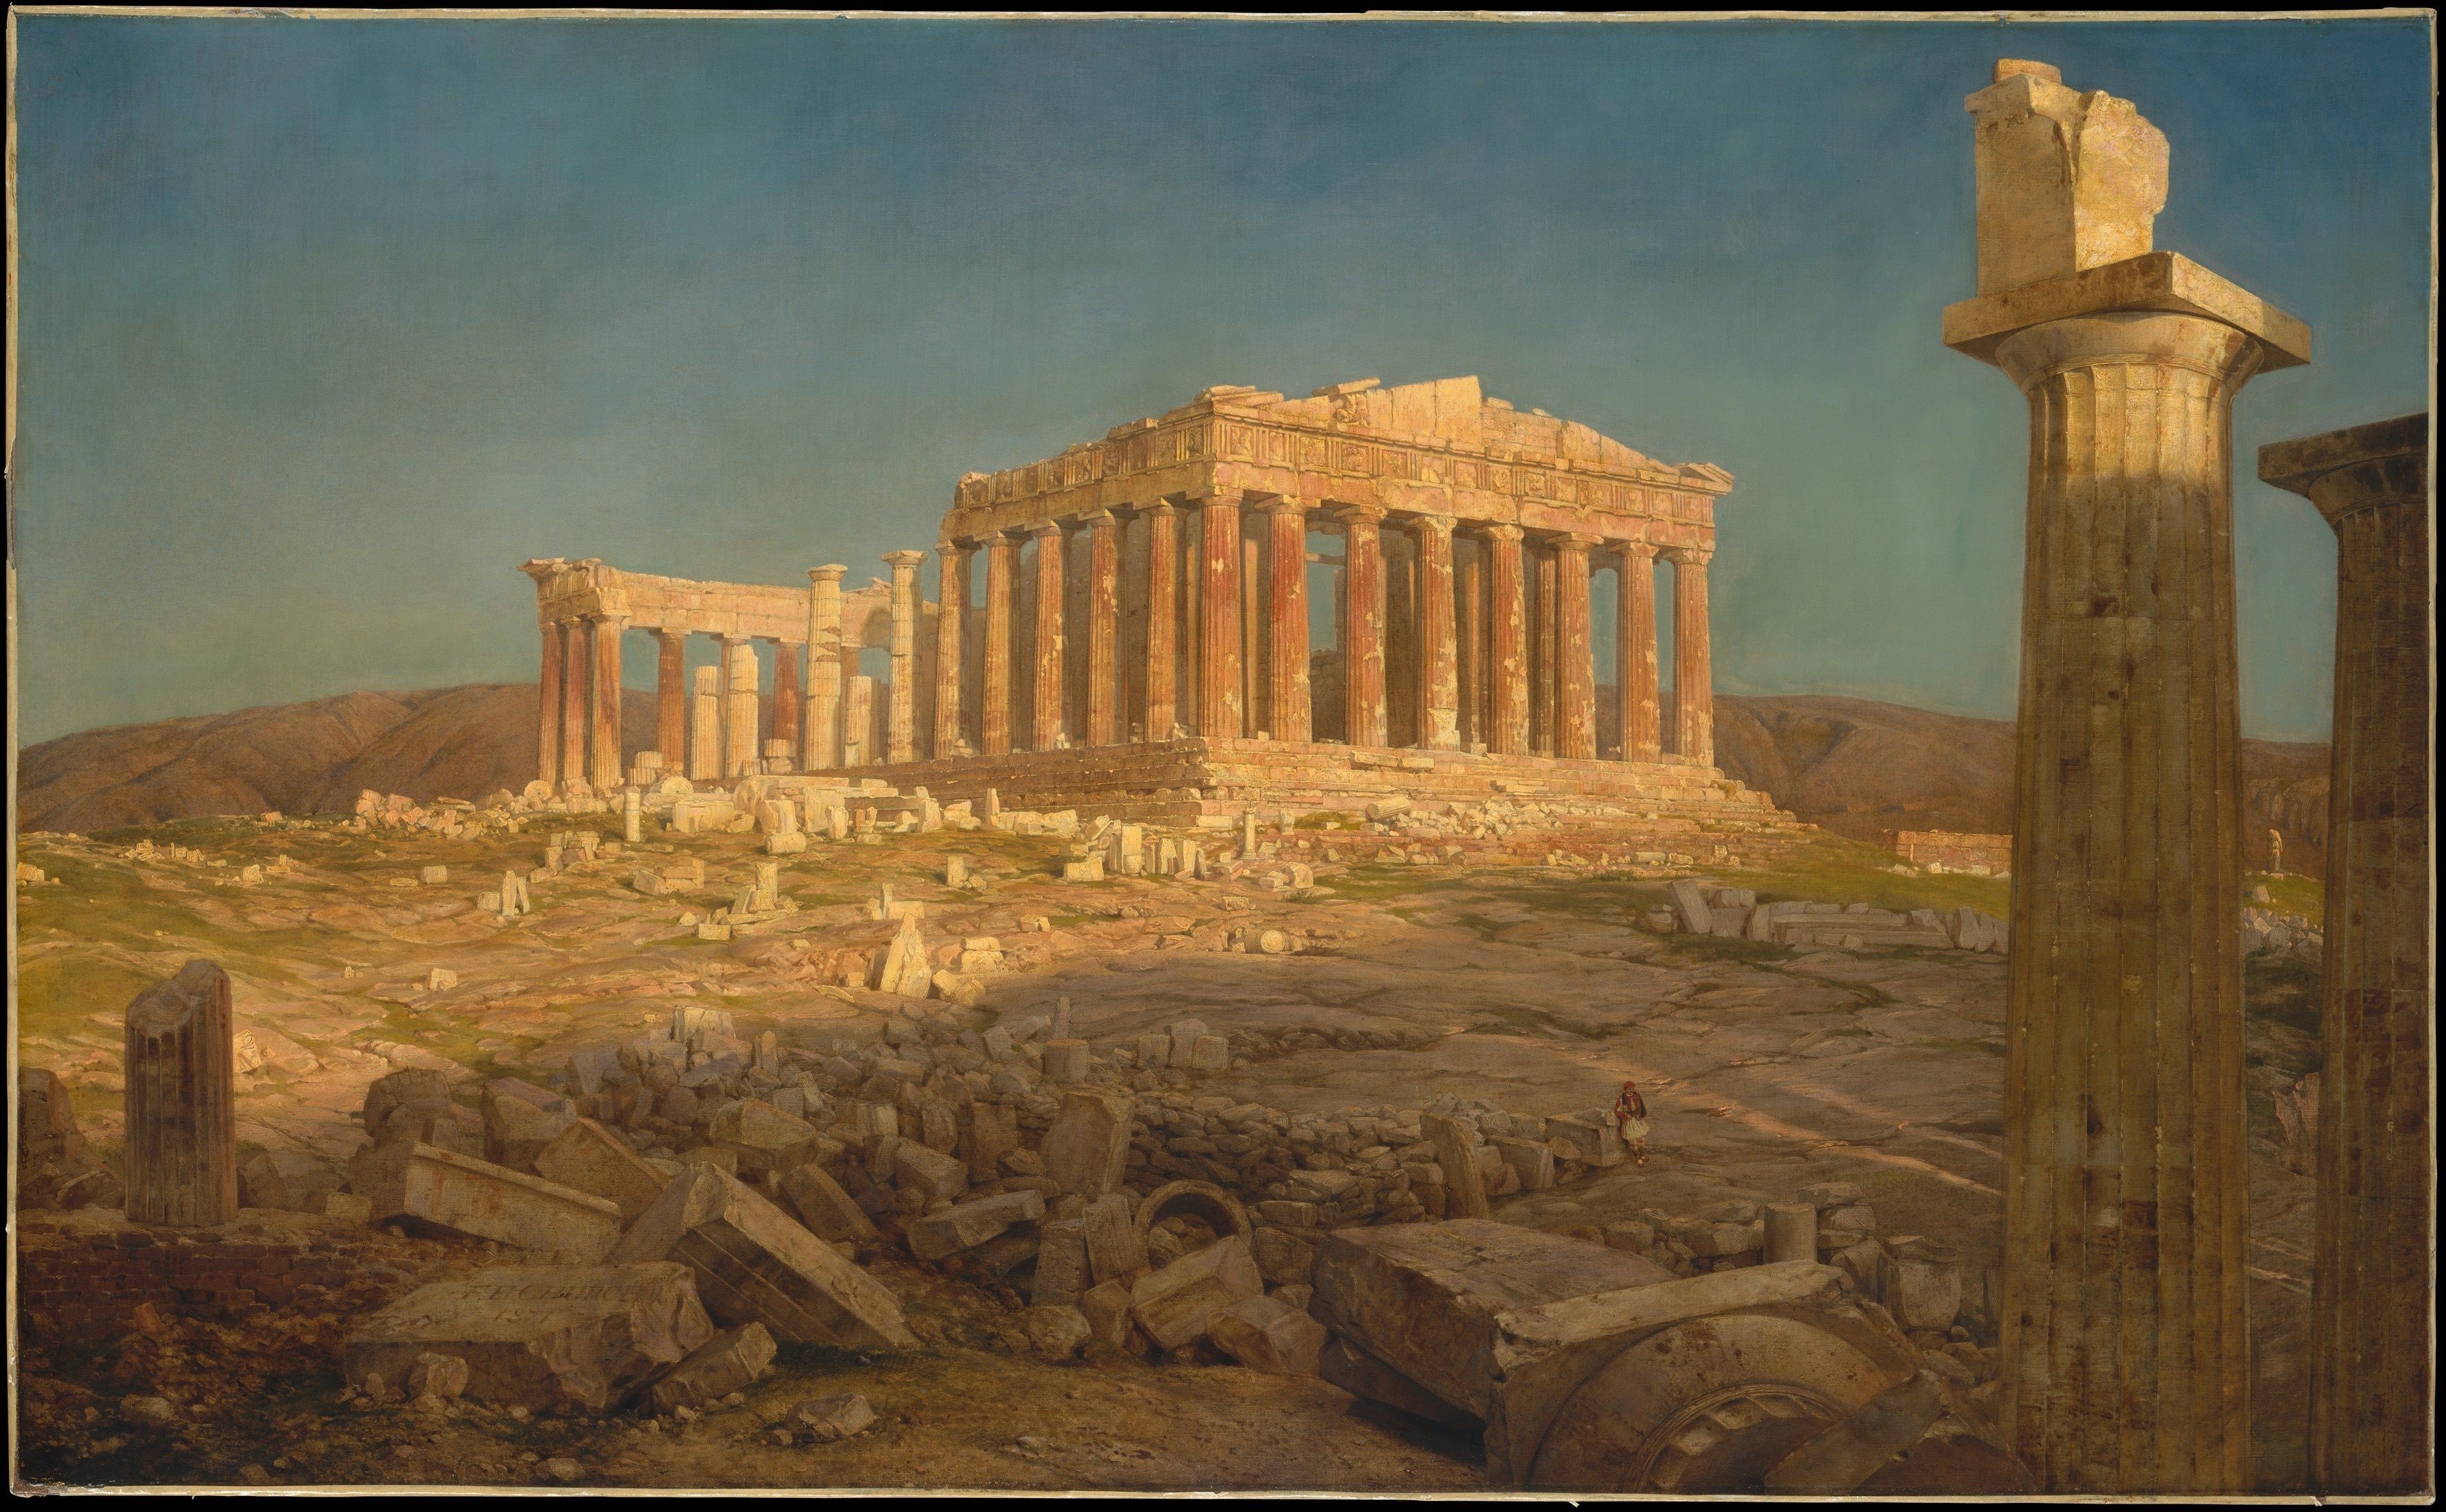 temple, painting, arch, ruins, Greek mythology, Frederic Edwin Church, The Parthenon, ART, landmark, screenshot, ancient history, ancient greek temple, ancient roman architecture Gallery HD Wallpaper